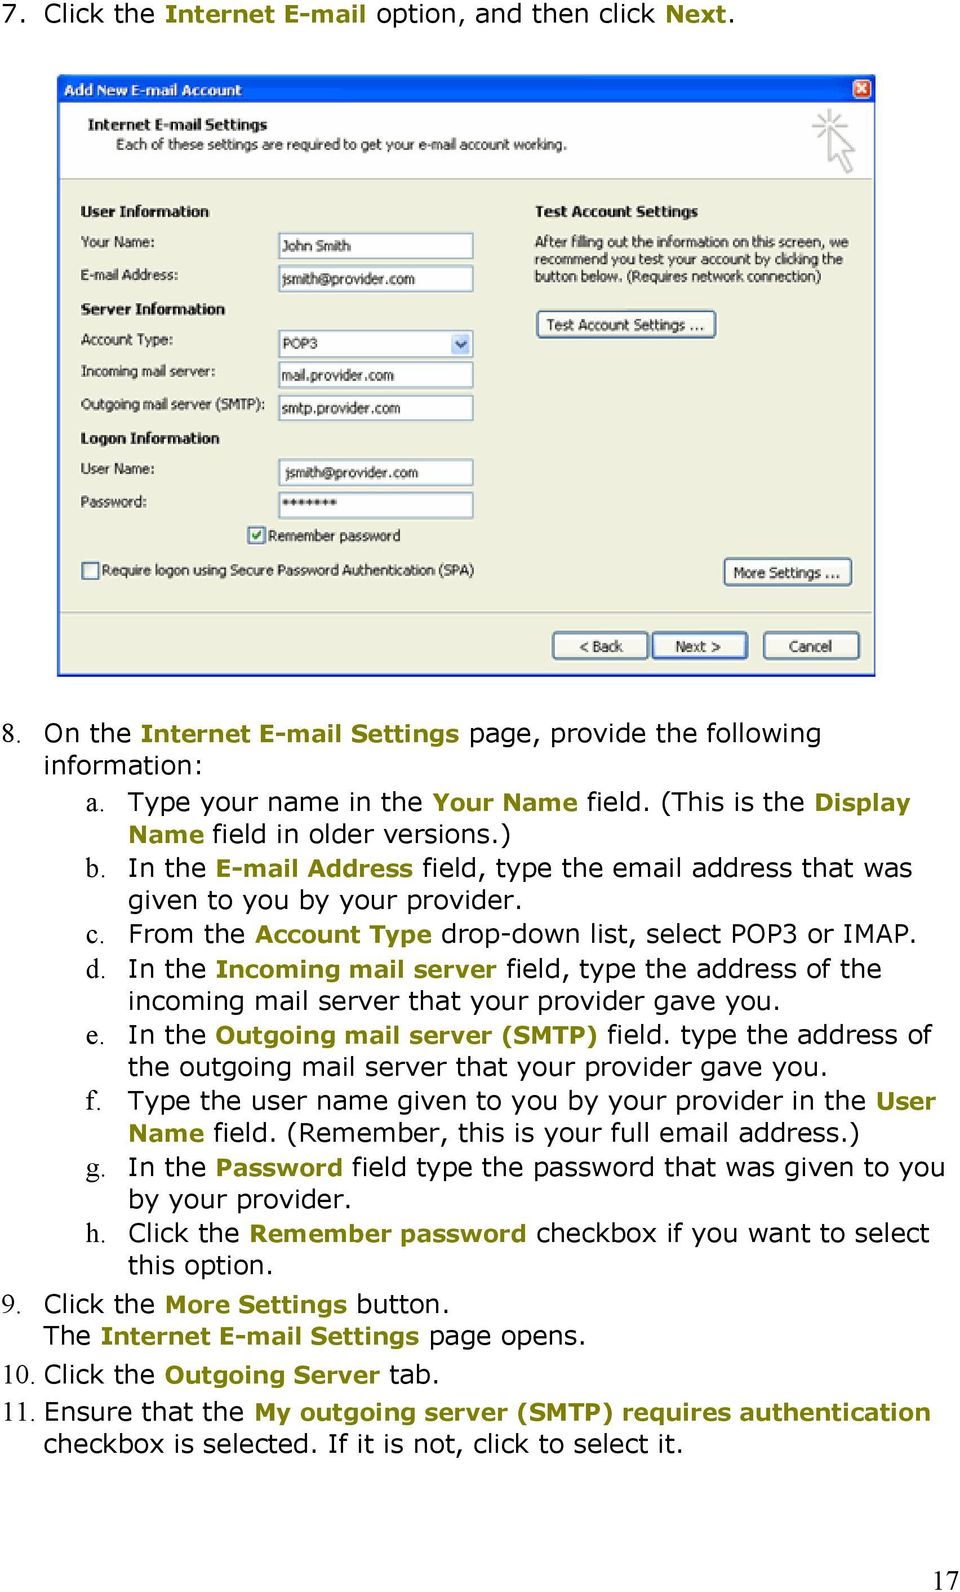 From the Account Type drop-down list, select POP3 or IMAP. d. In the Incoming mail server field, type the address of the incoming mail server that your provider gave you. e.